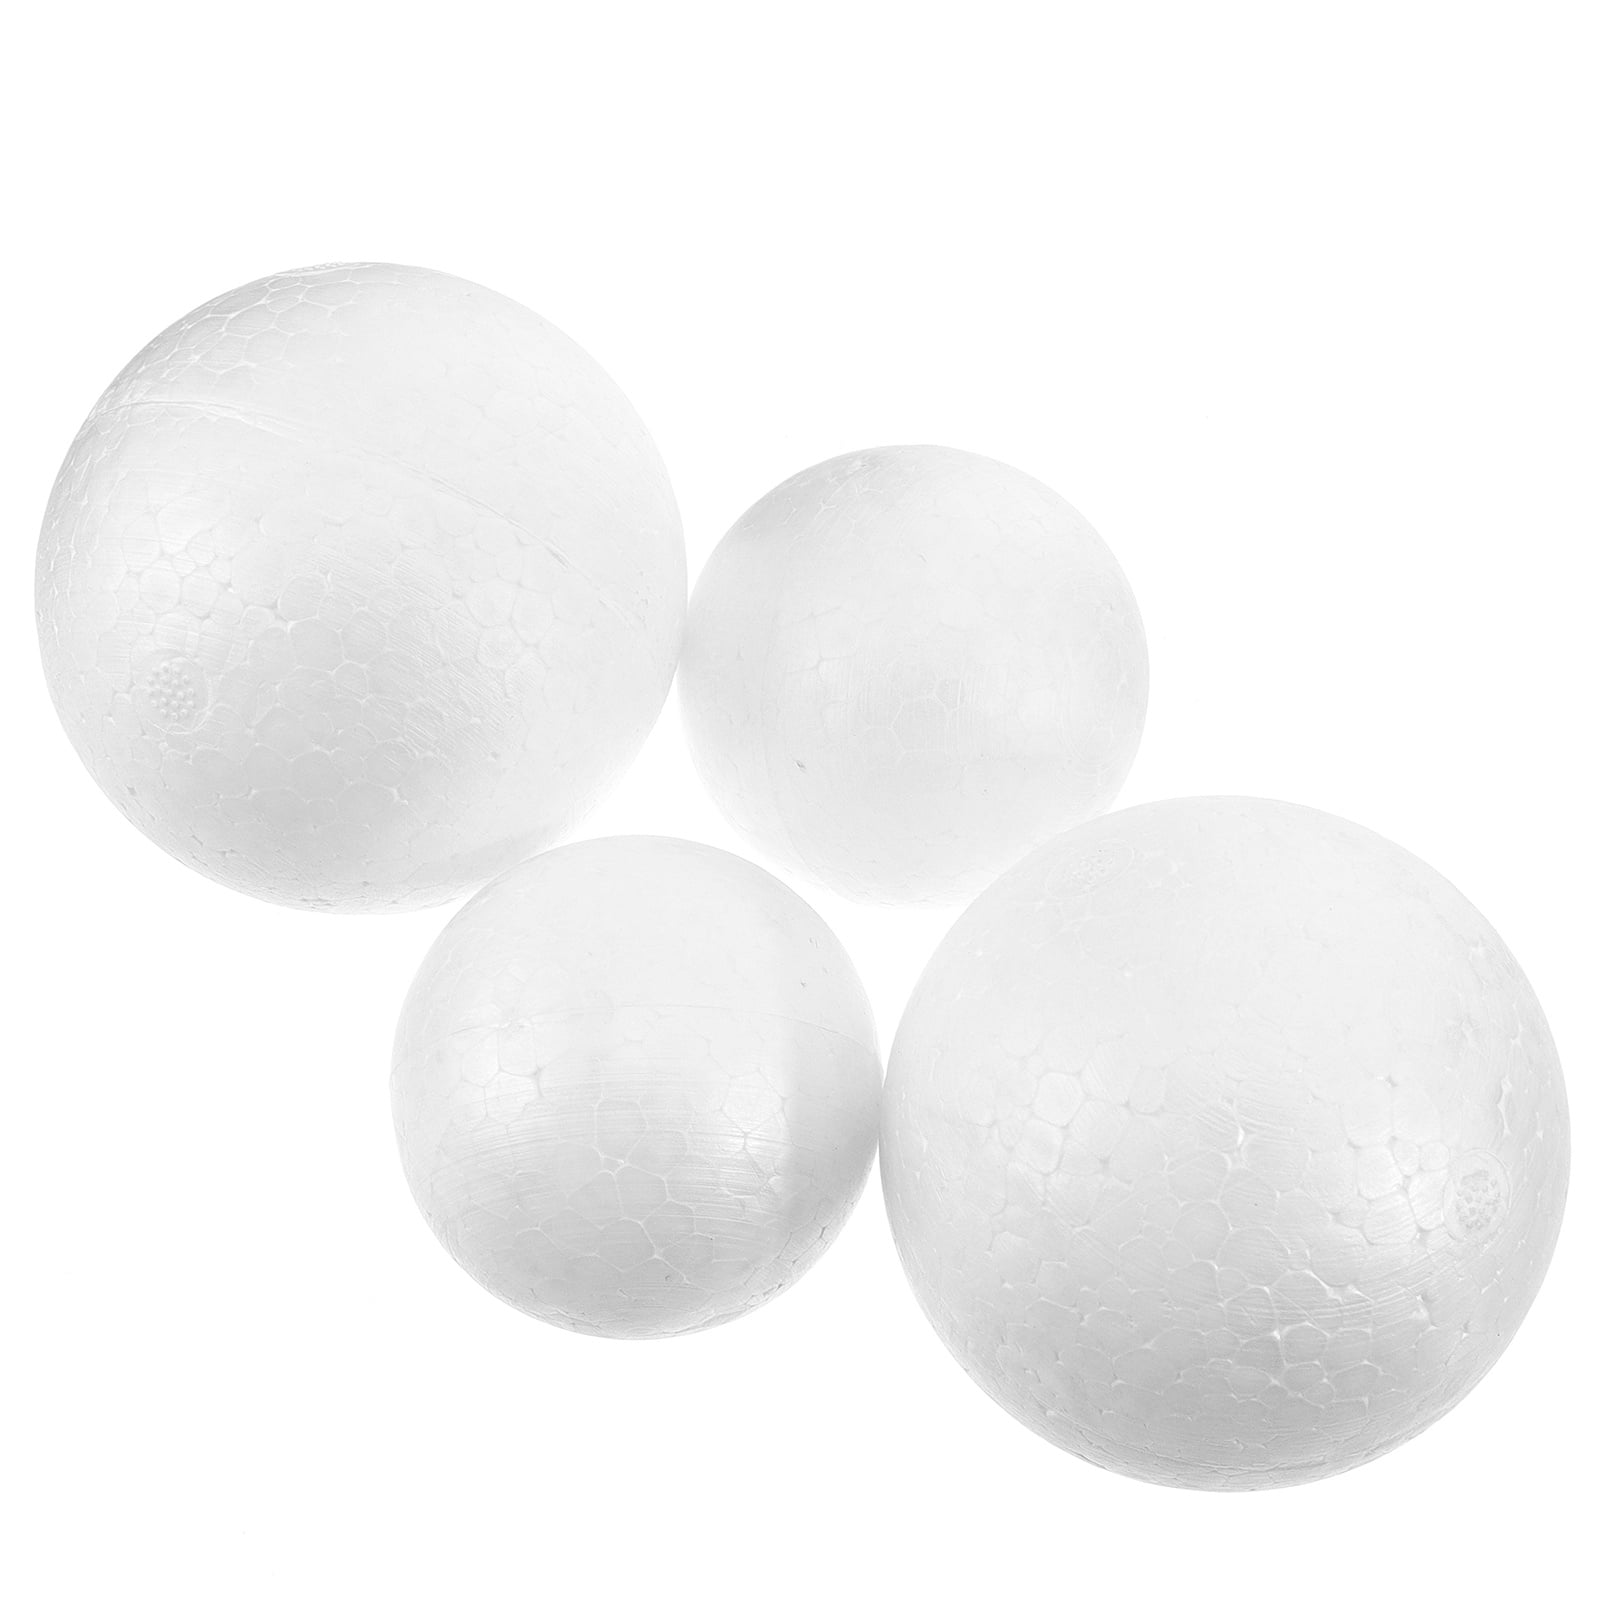 75-Pack Bulk Foam Balls for Crafts for DIY Arts and Supplies, 2 Inch, Small